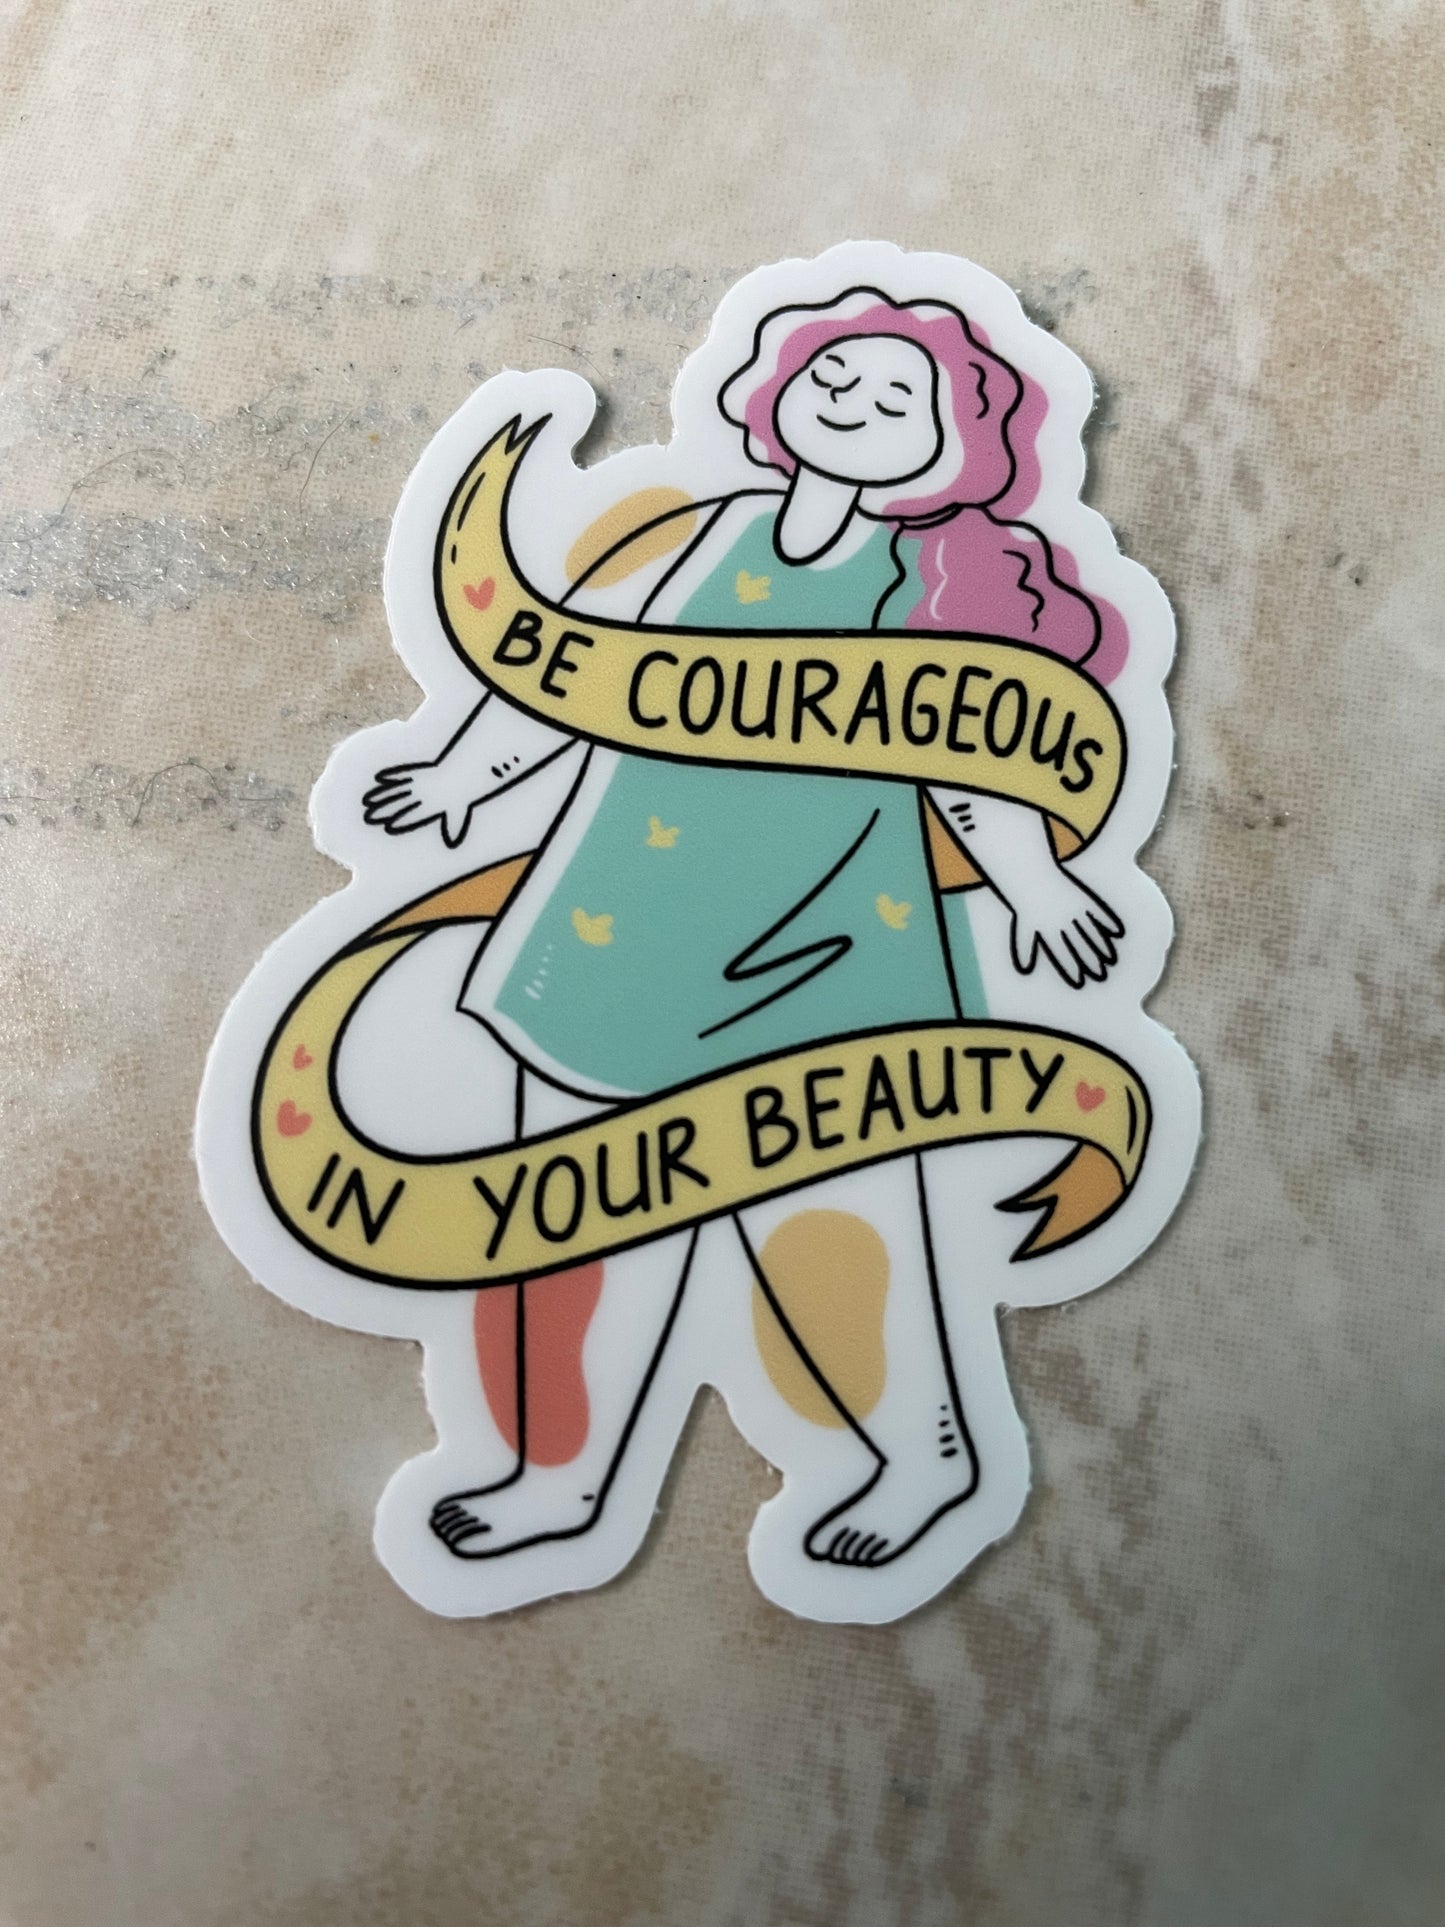 Be Courageous in Your Beauty Body Positivity Vinyl Sticker